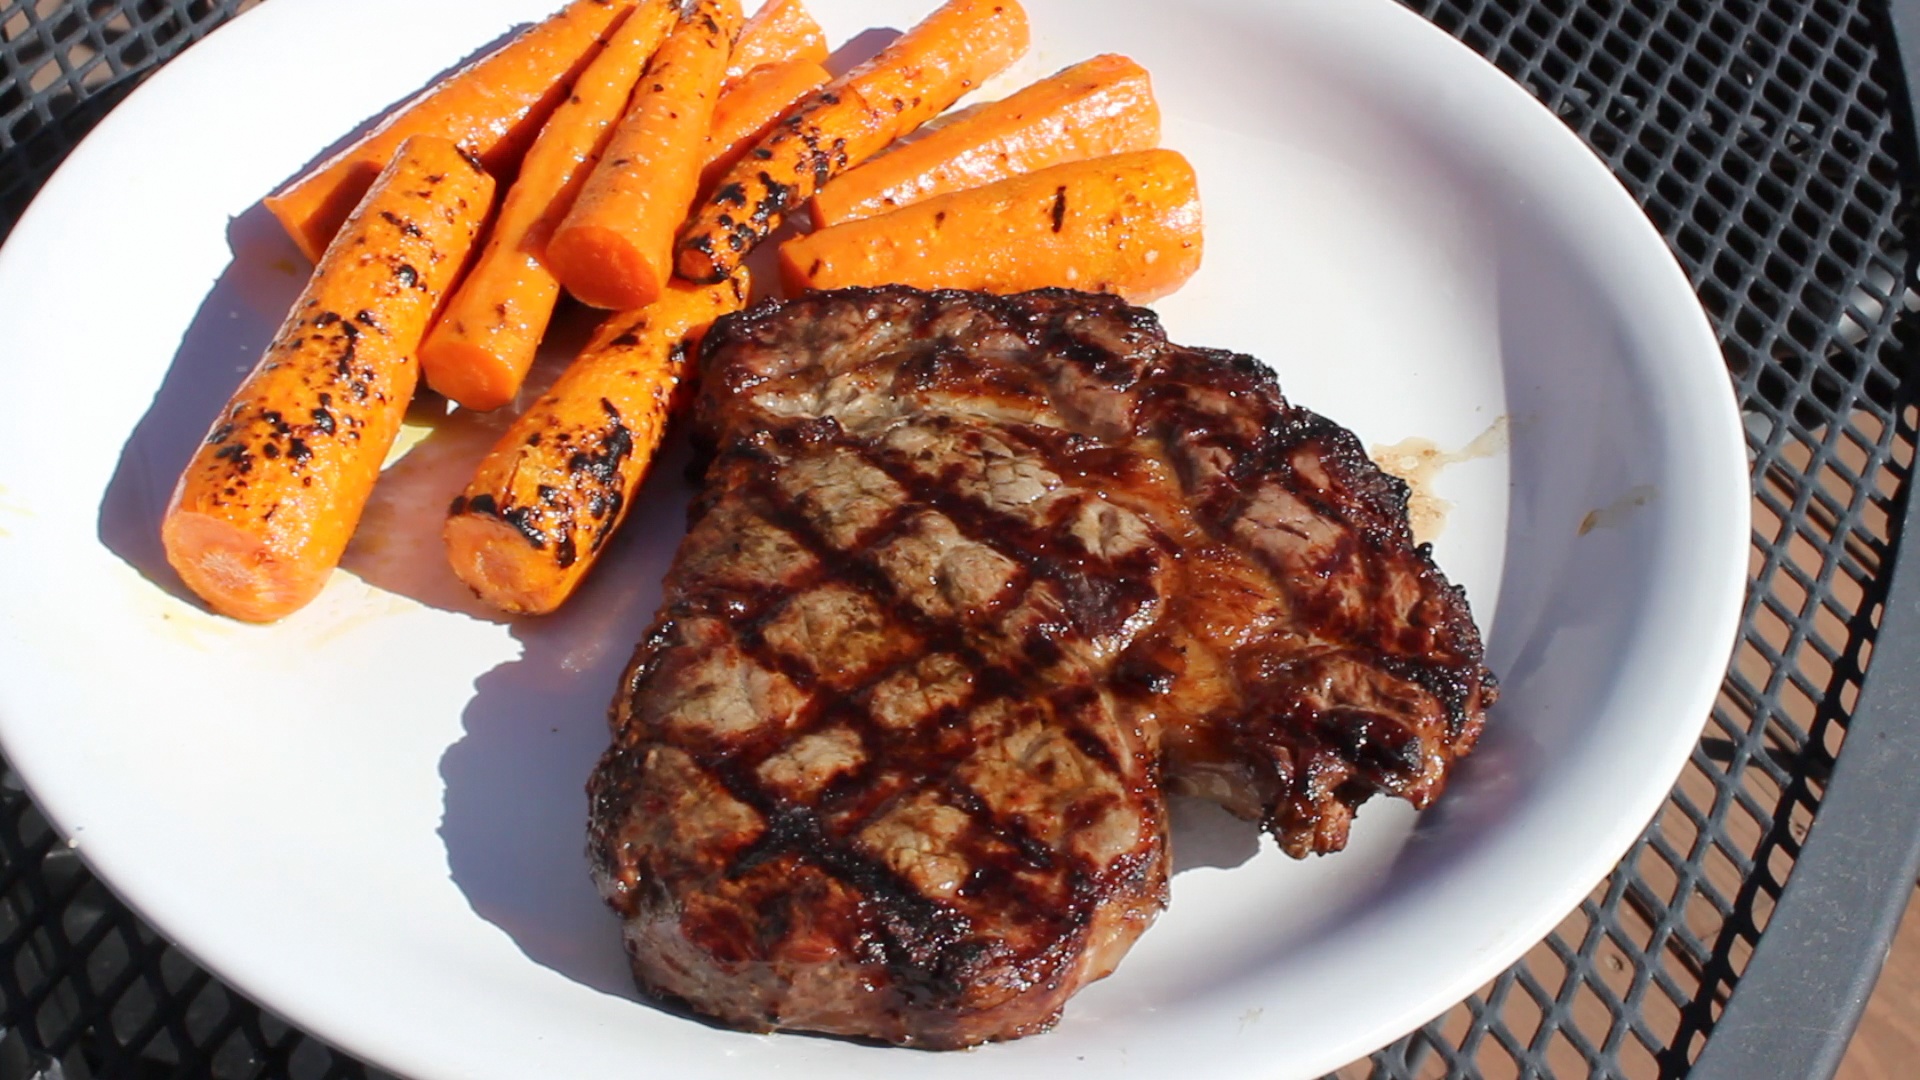 How to Grill Great Looking Steaks